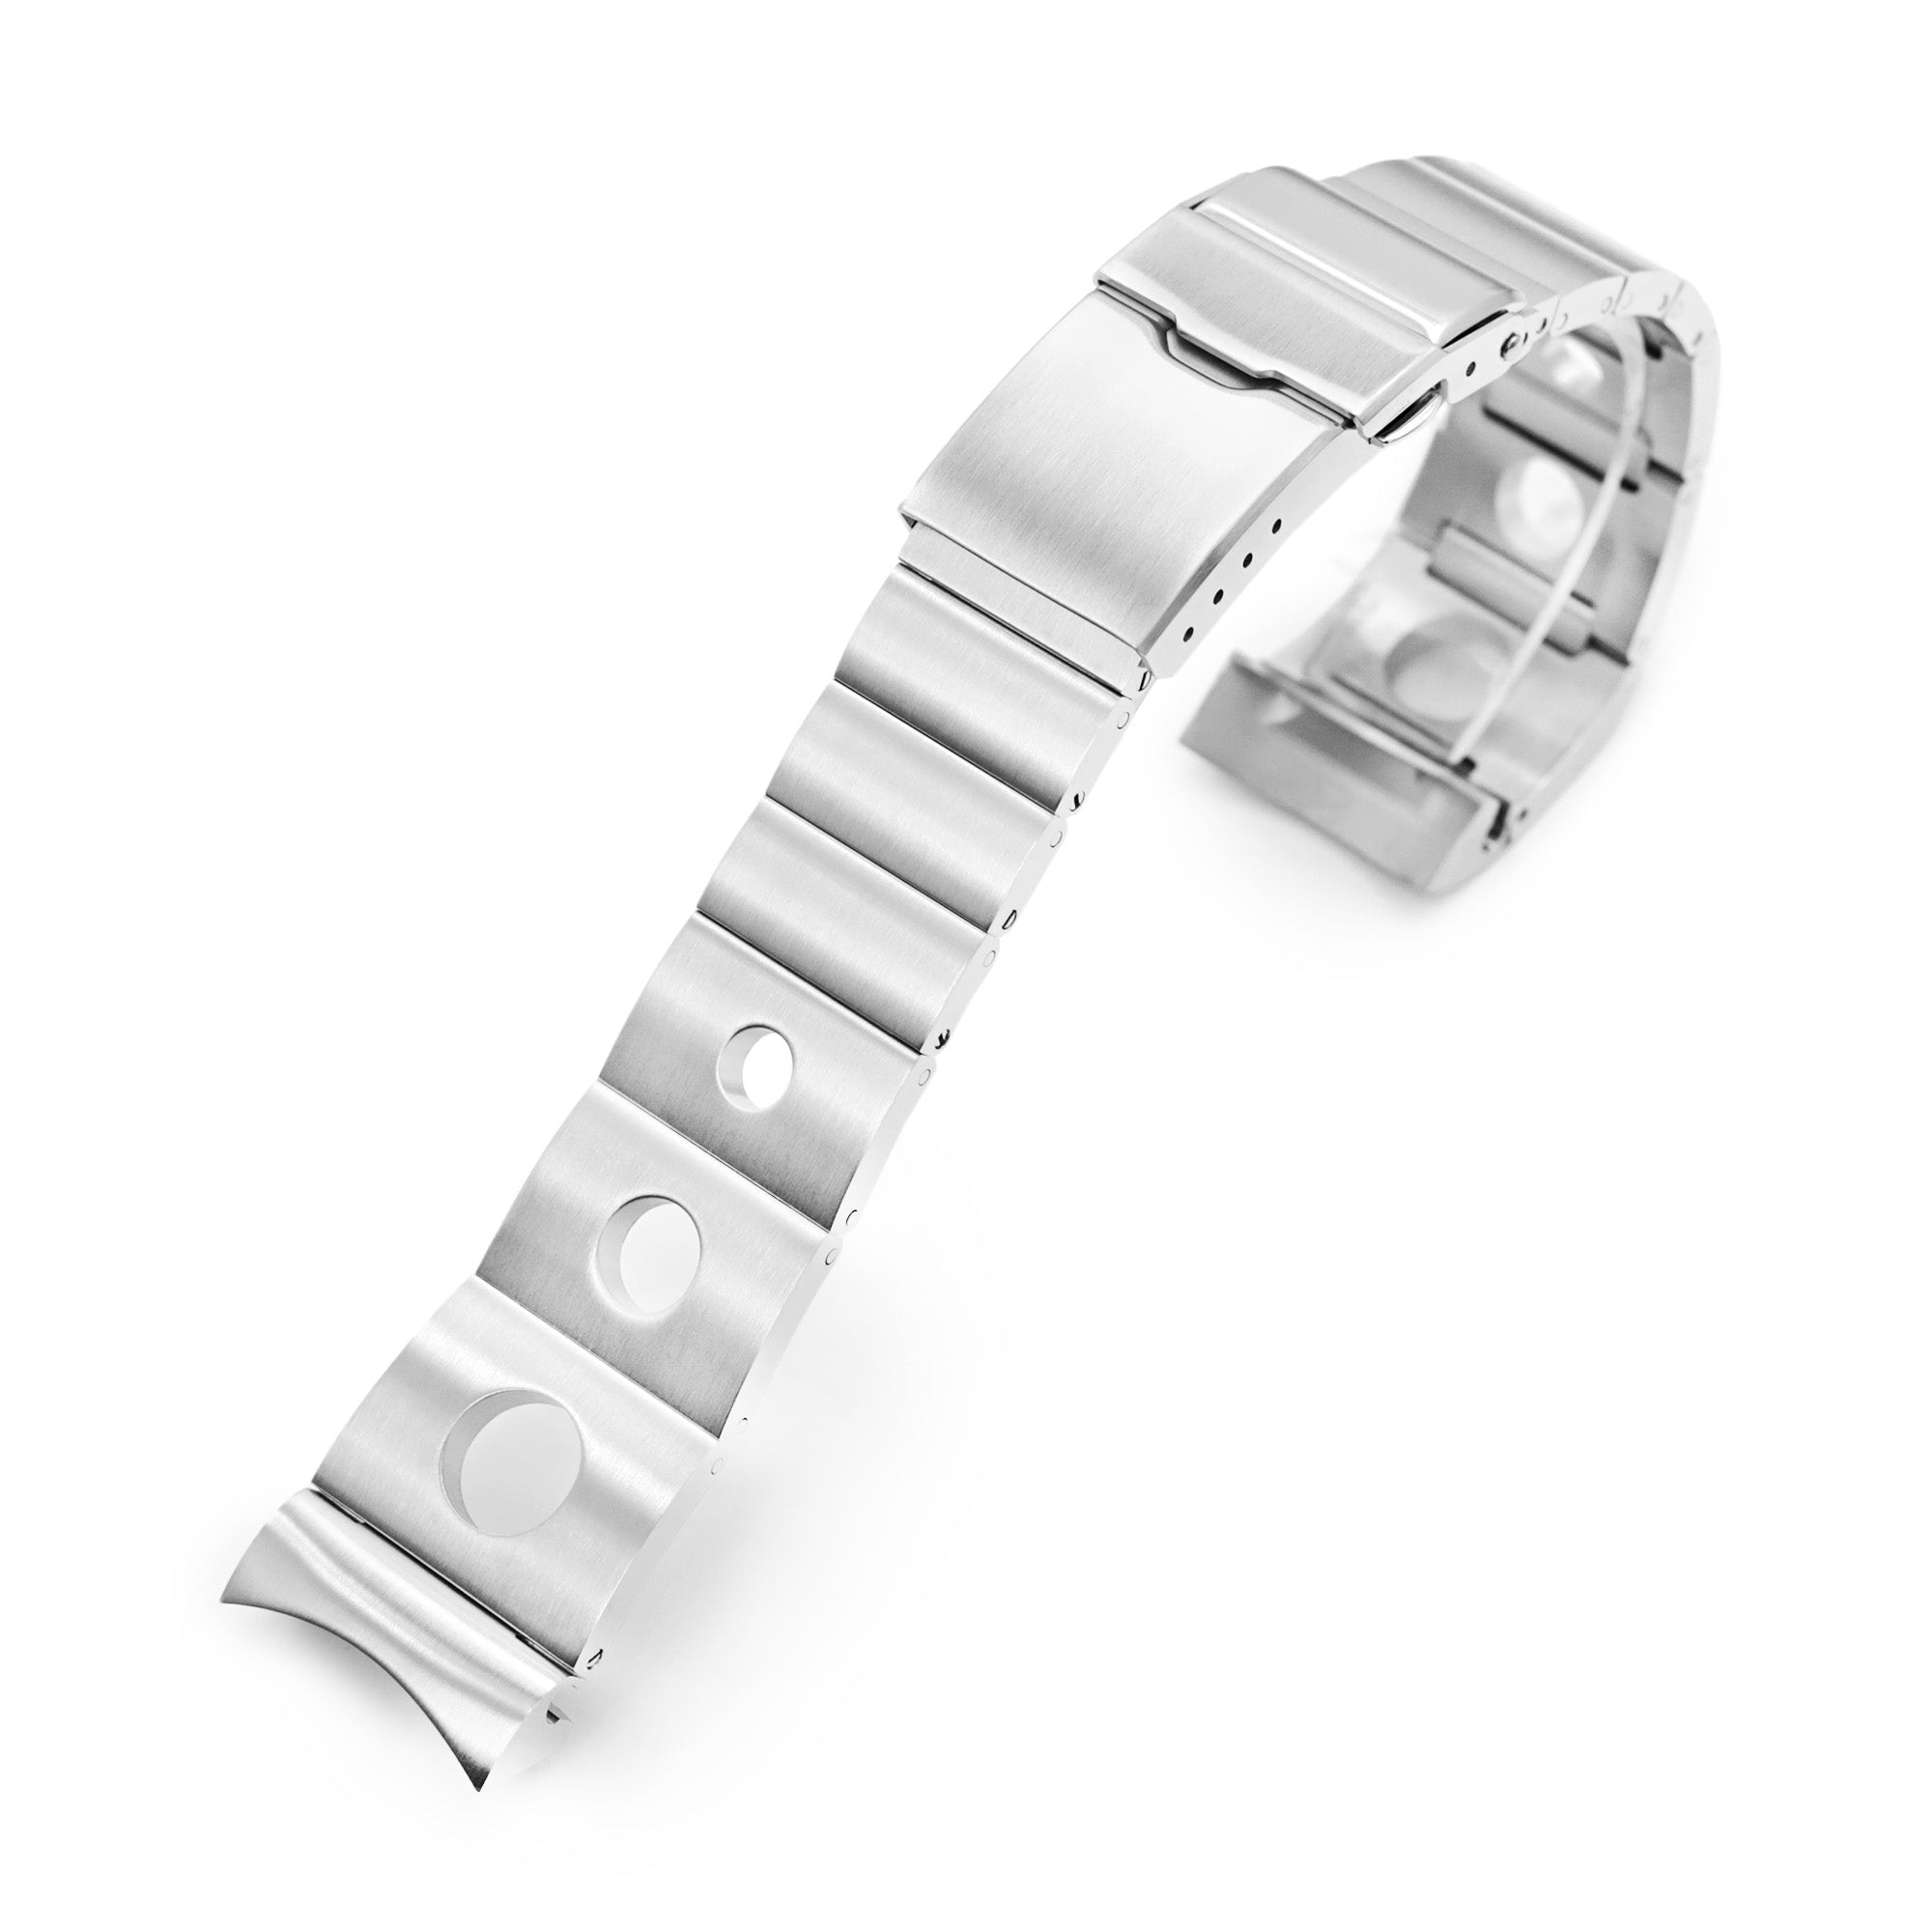 22mm Rollball version II Watch Band for Seiko GMT SSK001, 316L Stainless Steel Brushed Baton Diver Clasp Strapcode Watch Bands